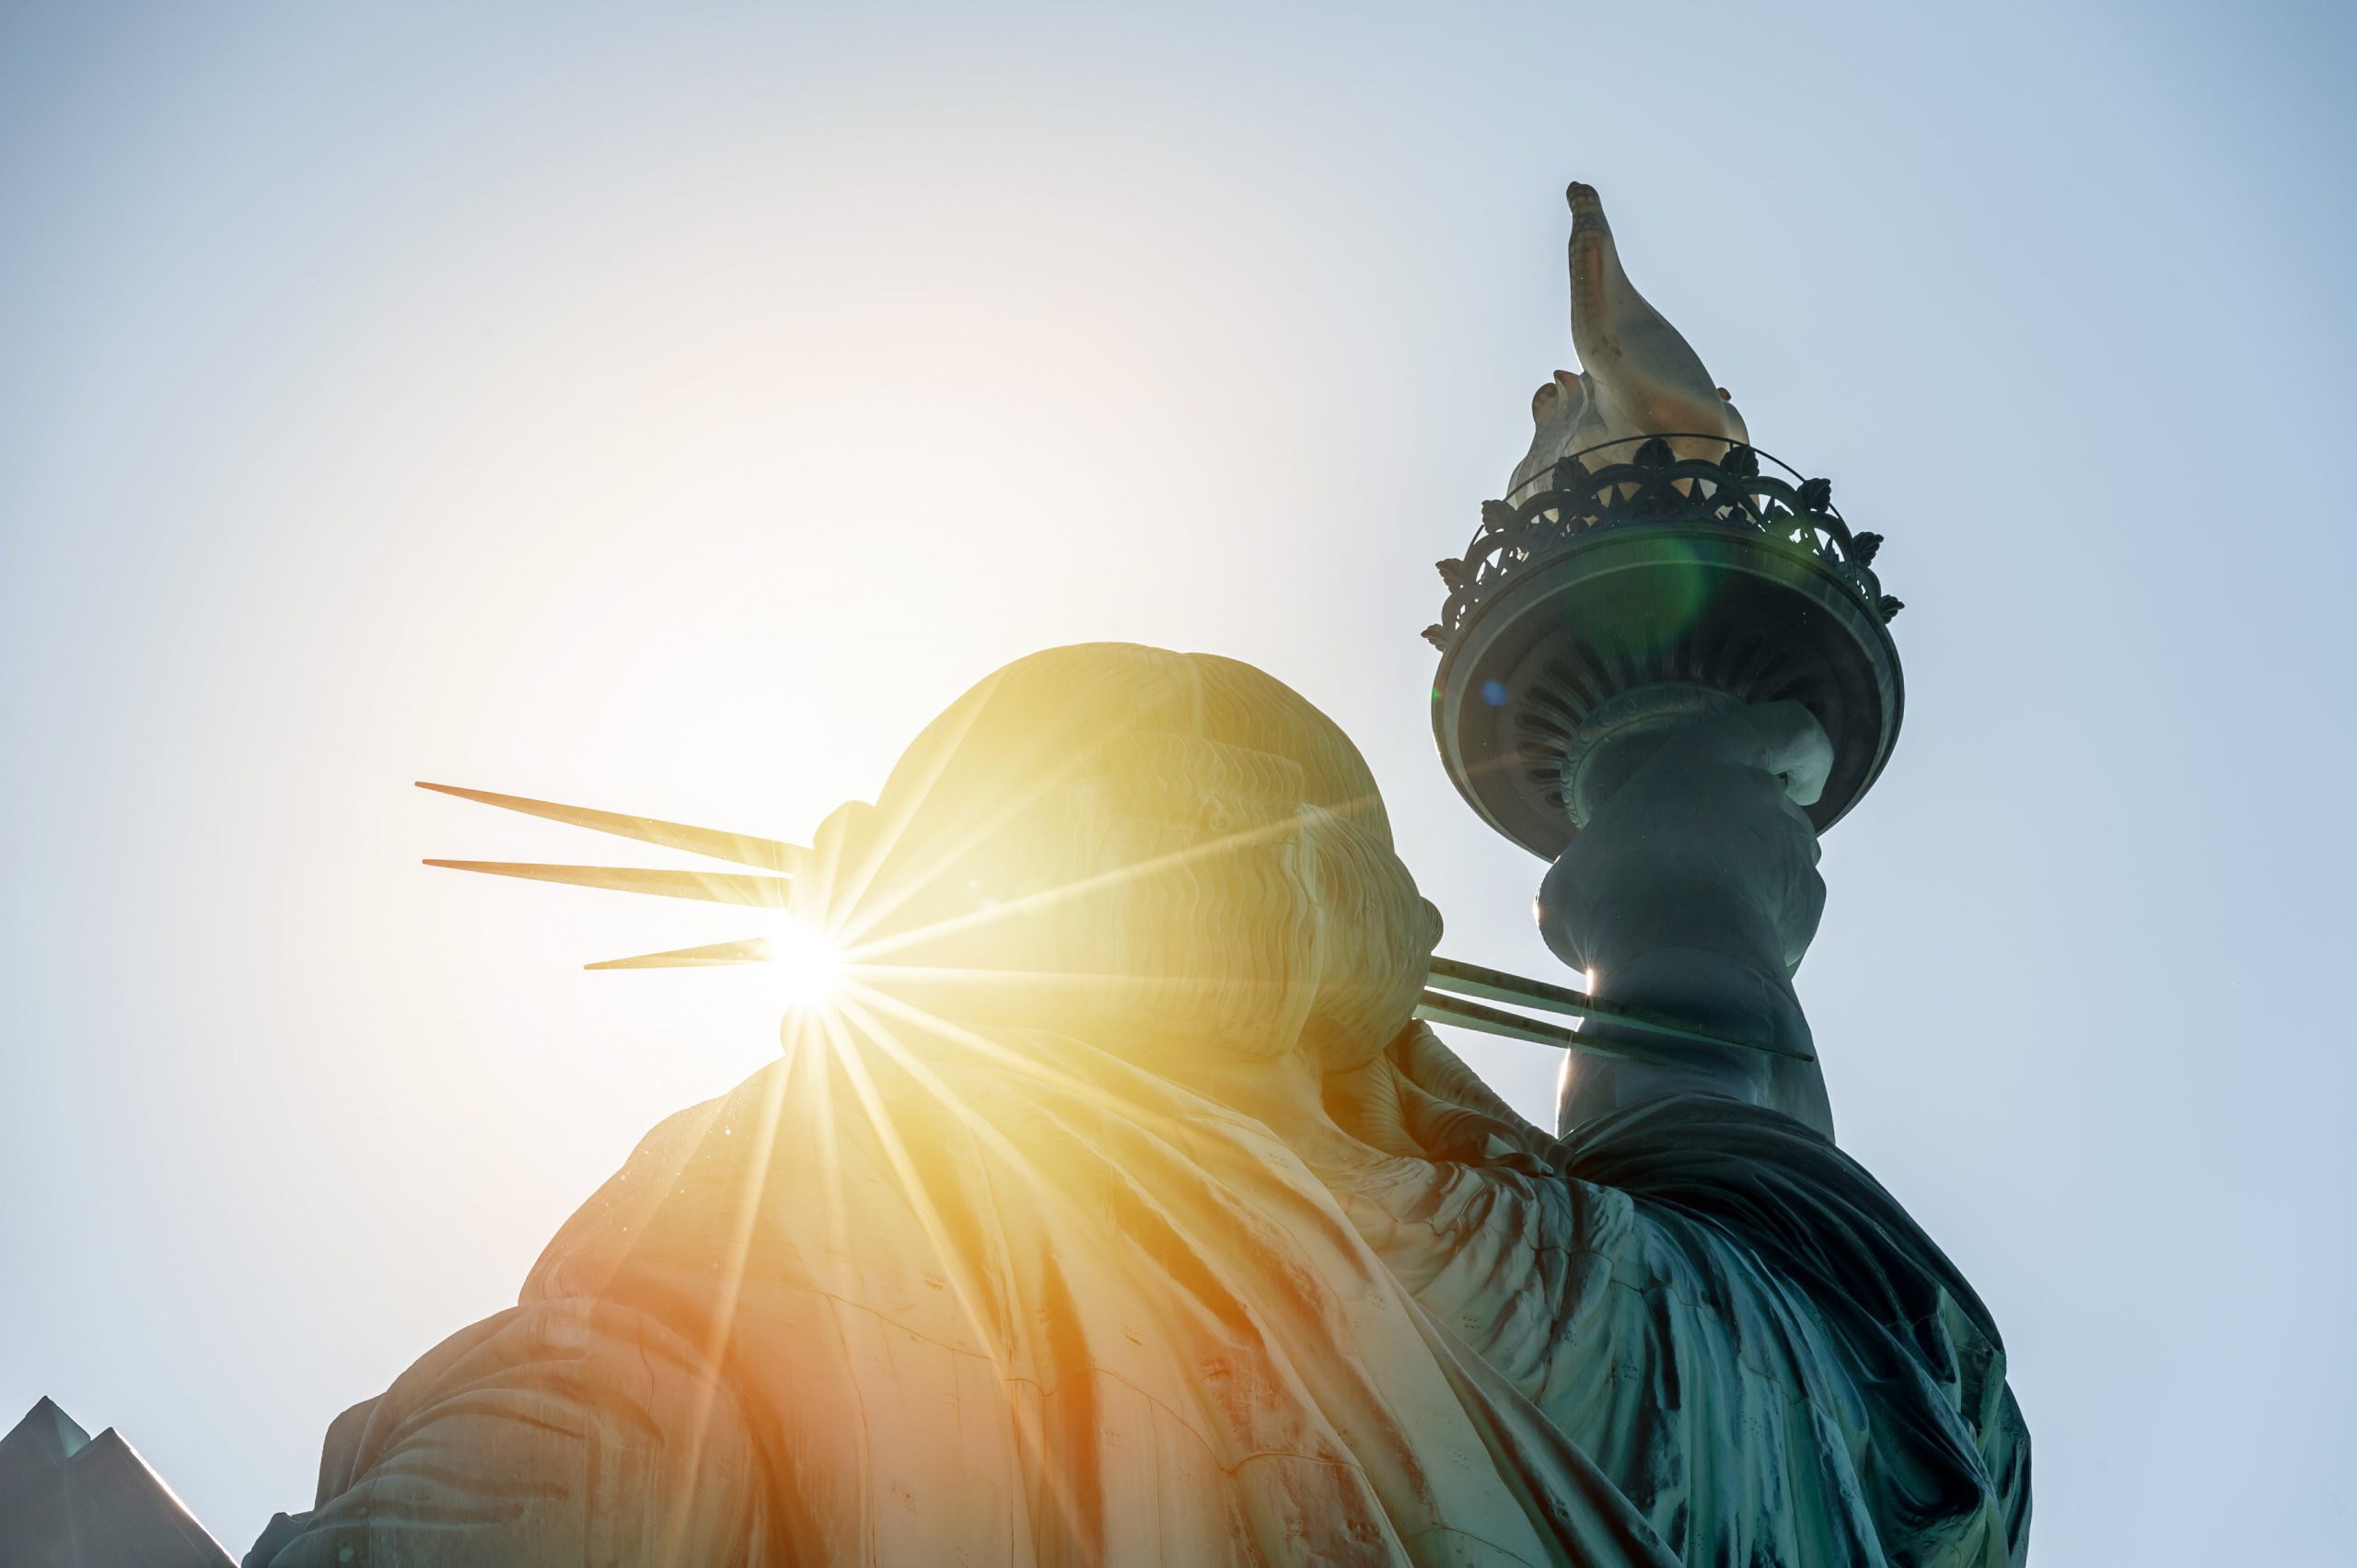 The Rigorous Enforcement of Immigration Law That Affects All